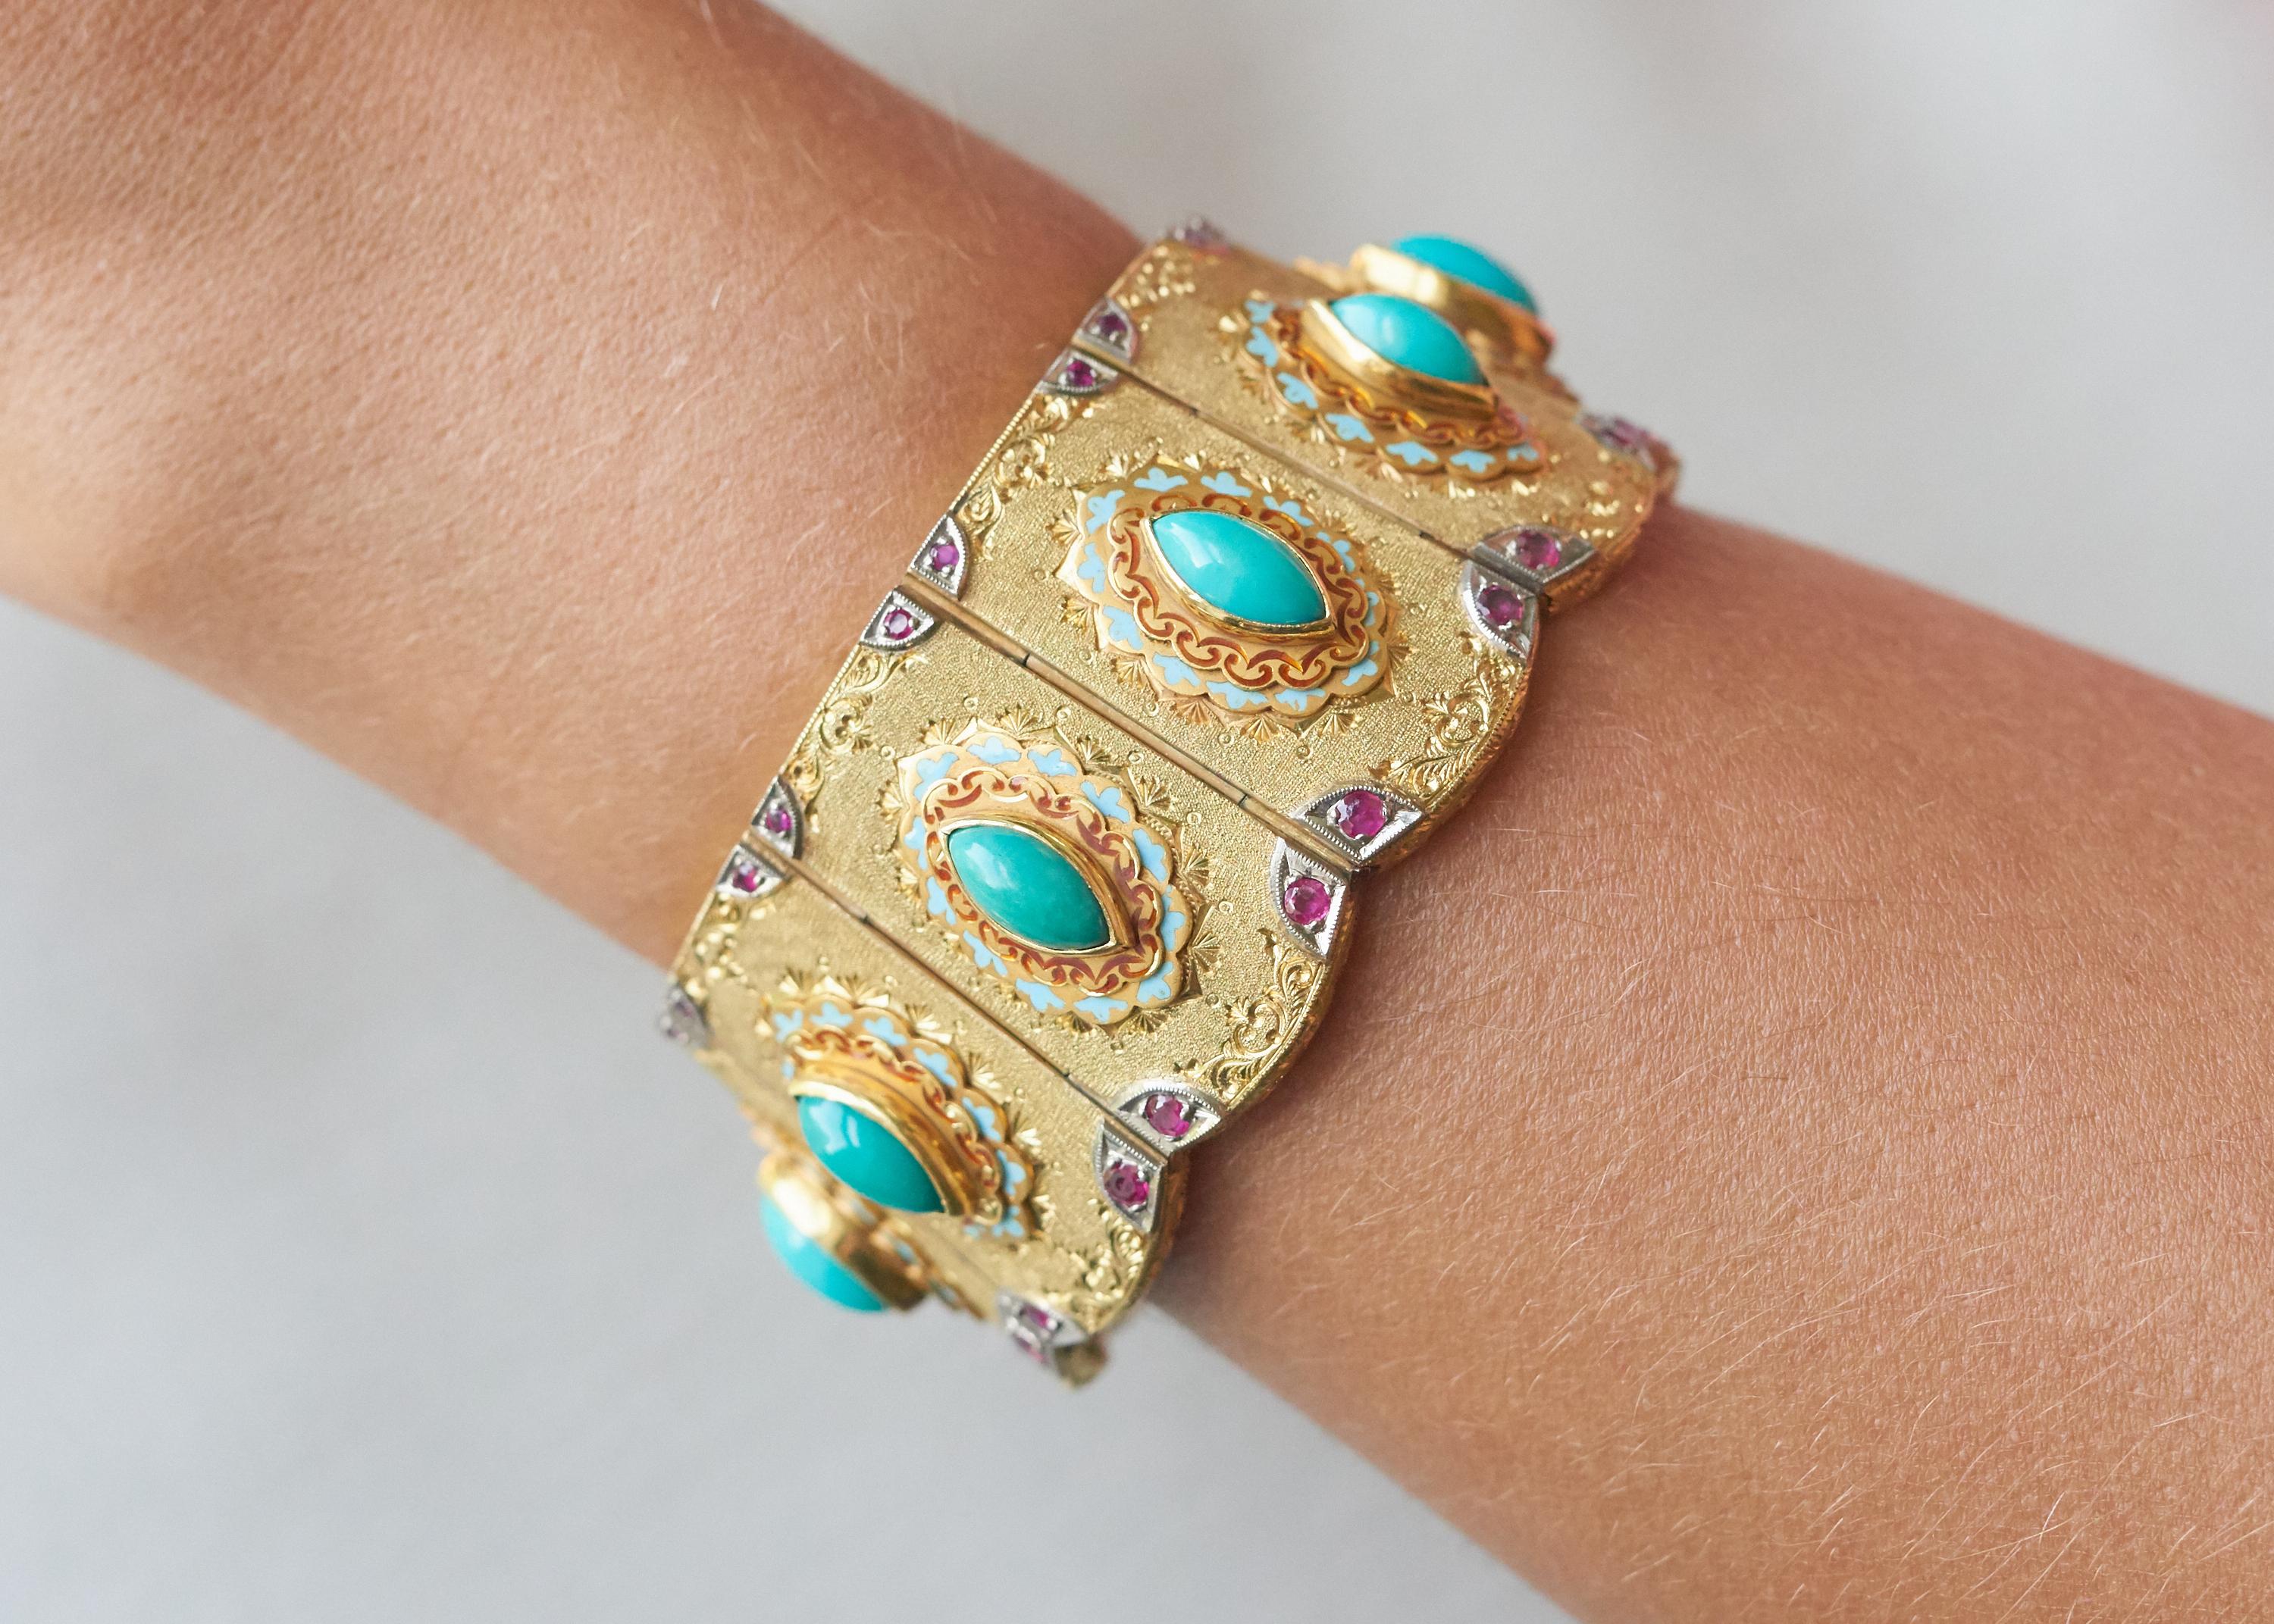 A handmade, unique, turquoise, ruby, enamel, and 18 karat gold scalloped bracelet, by Angelo Giorgio Cazzaniga, c. 1960. Signed Cazzaniga, AGC, stamped 750. 

This exquisite bracelet is typical of the Cazzaniga style, designed, with an eclectic mix